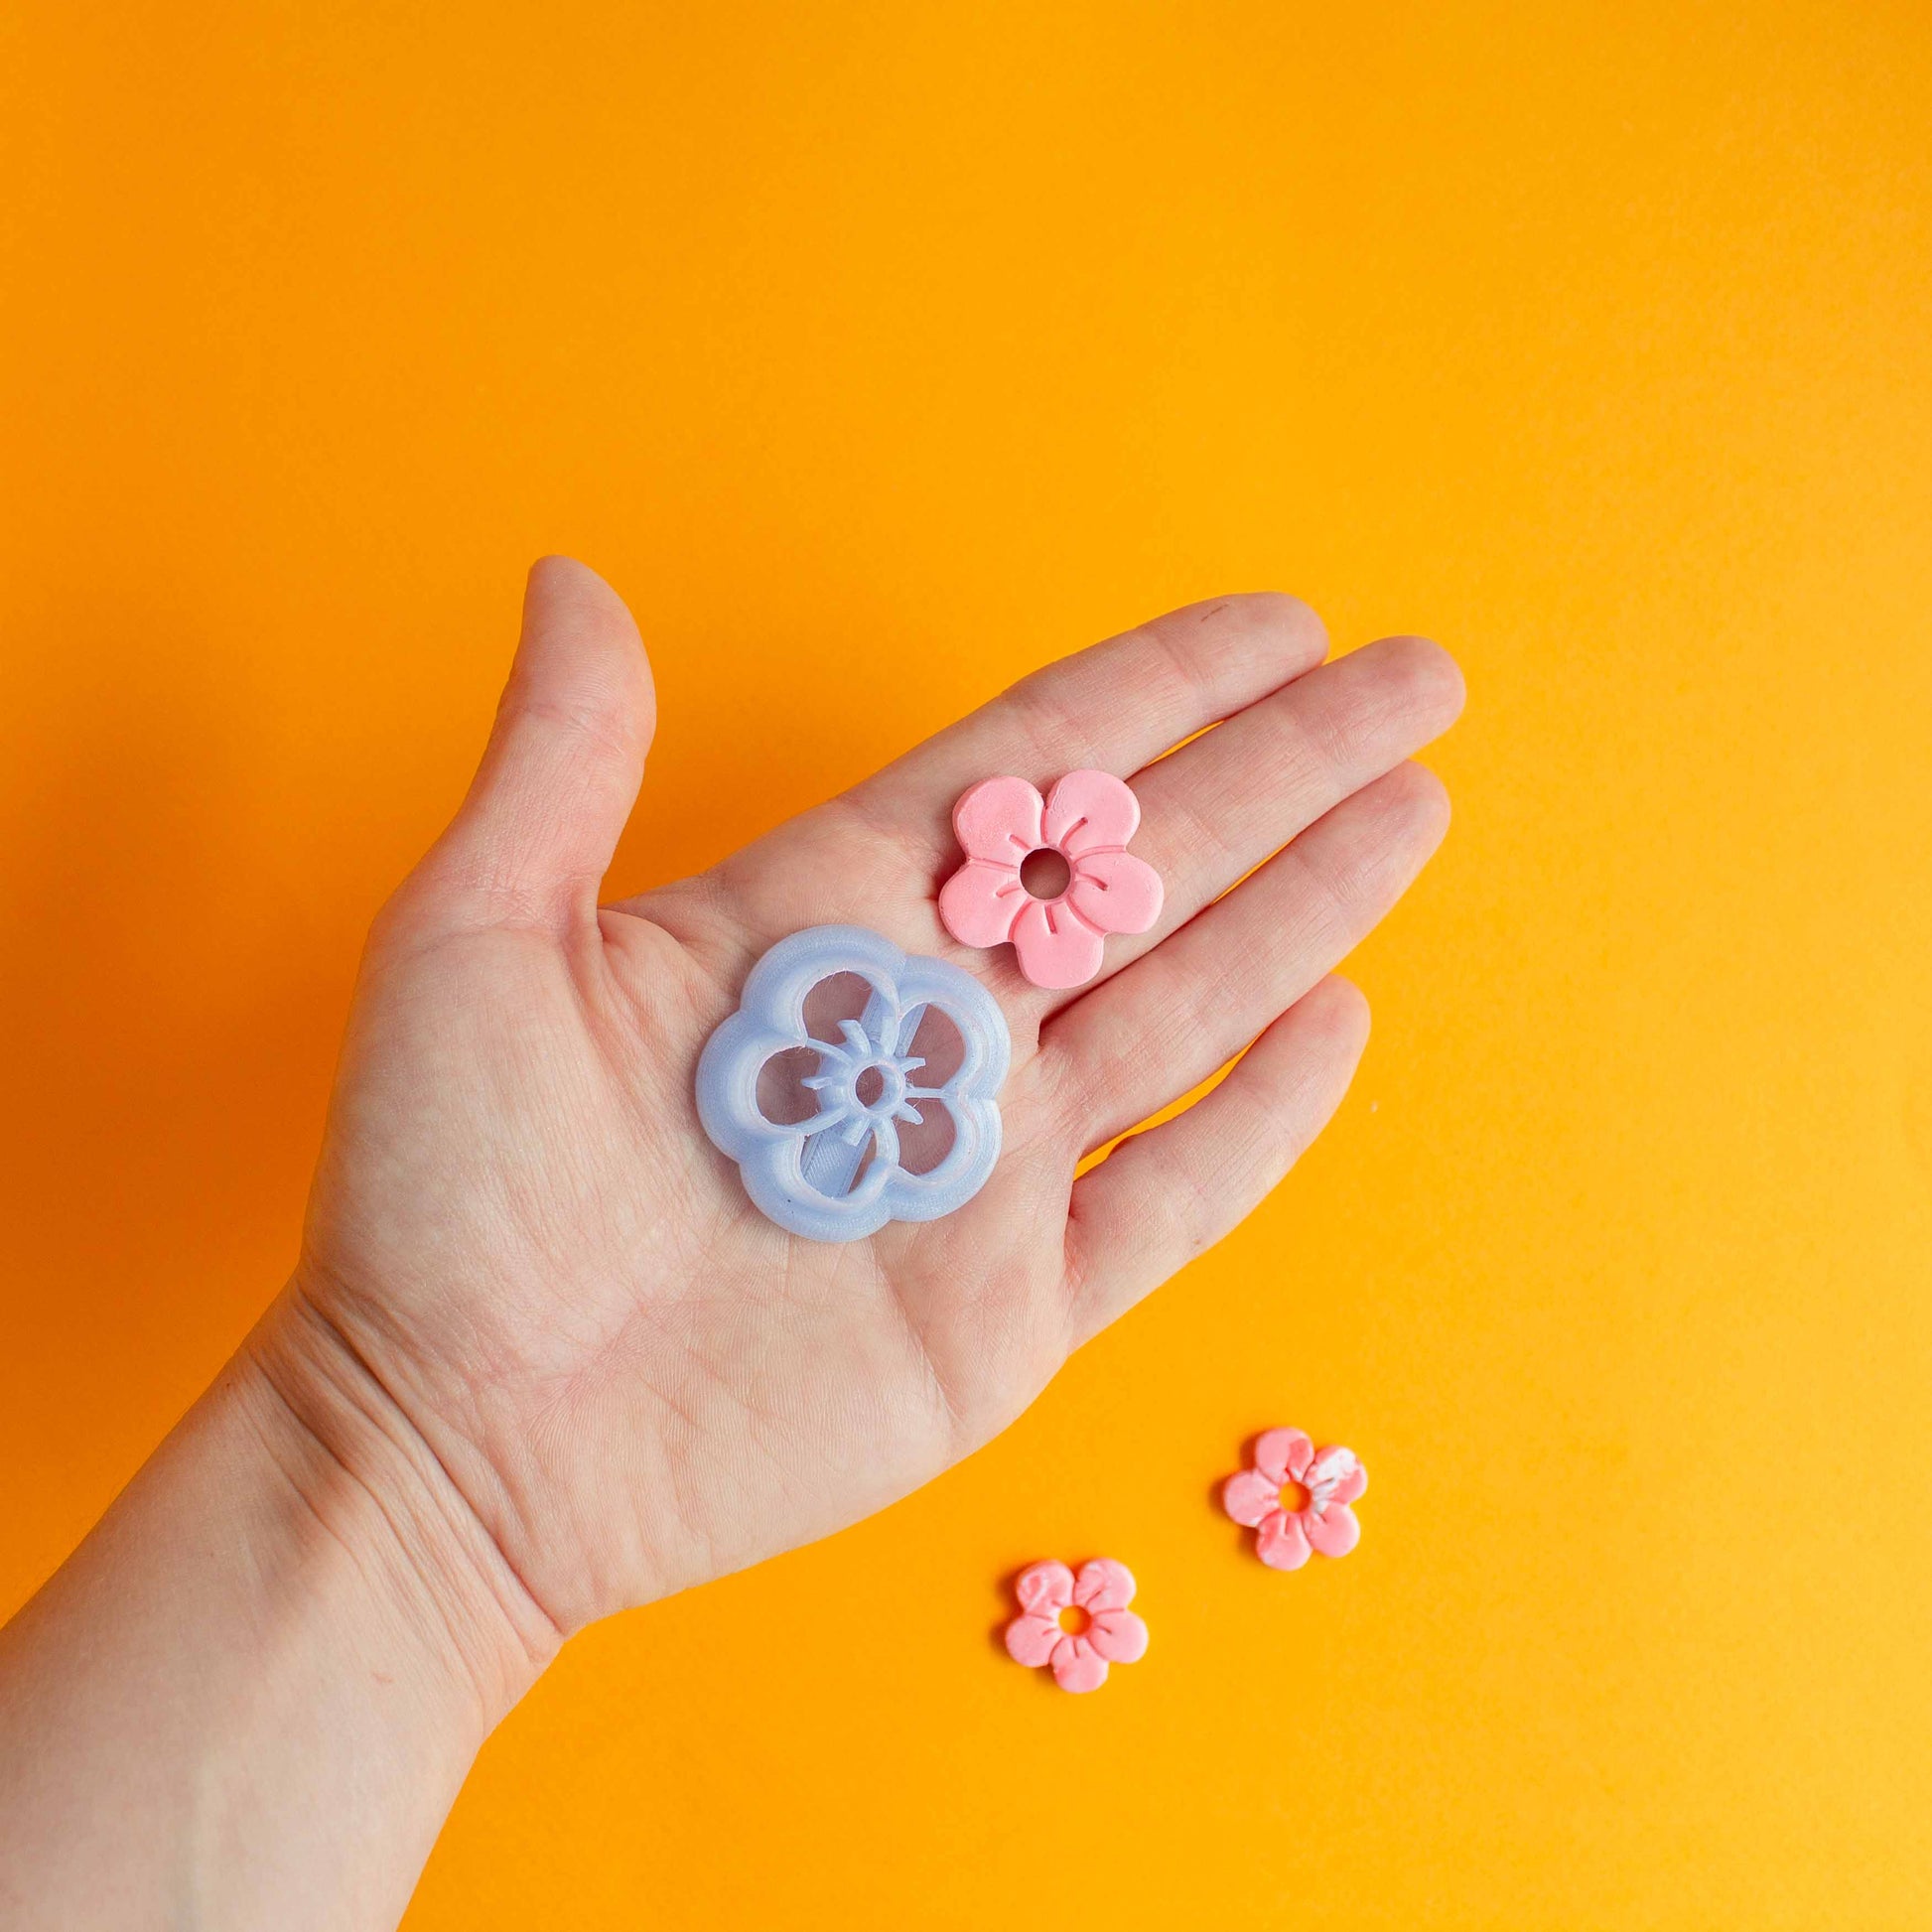 FLower shaped cutter and polymer clay flower displayed on a hand, and two smaller sized clay flowers